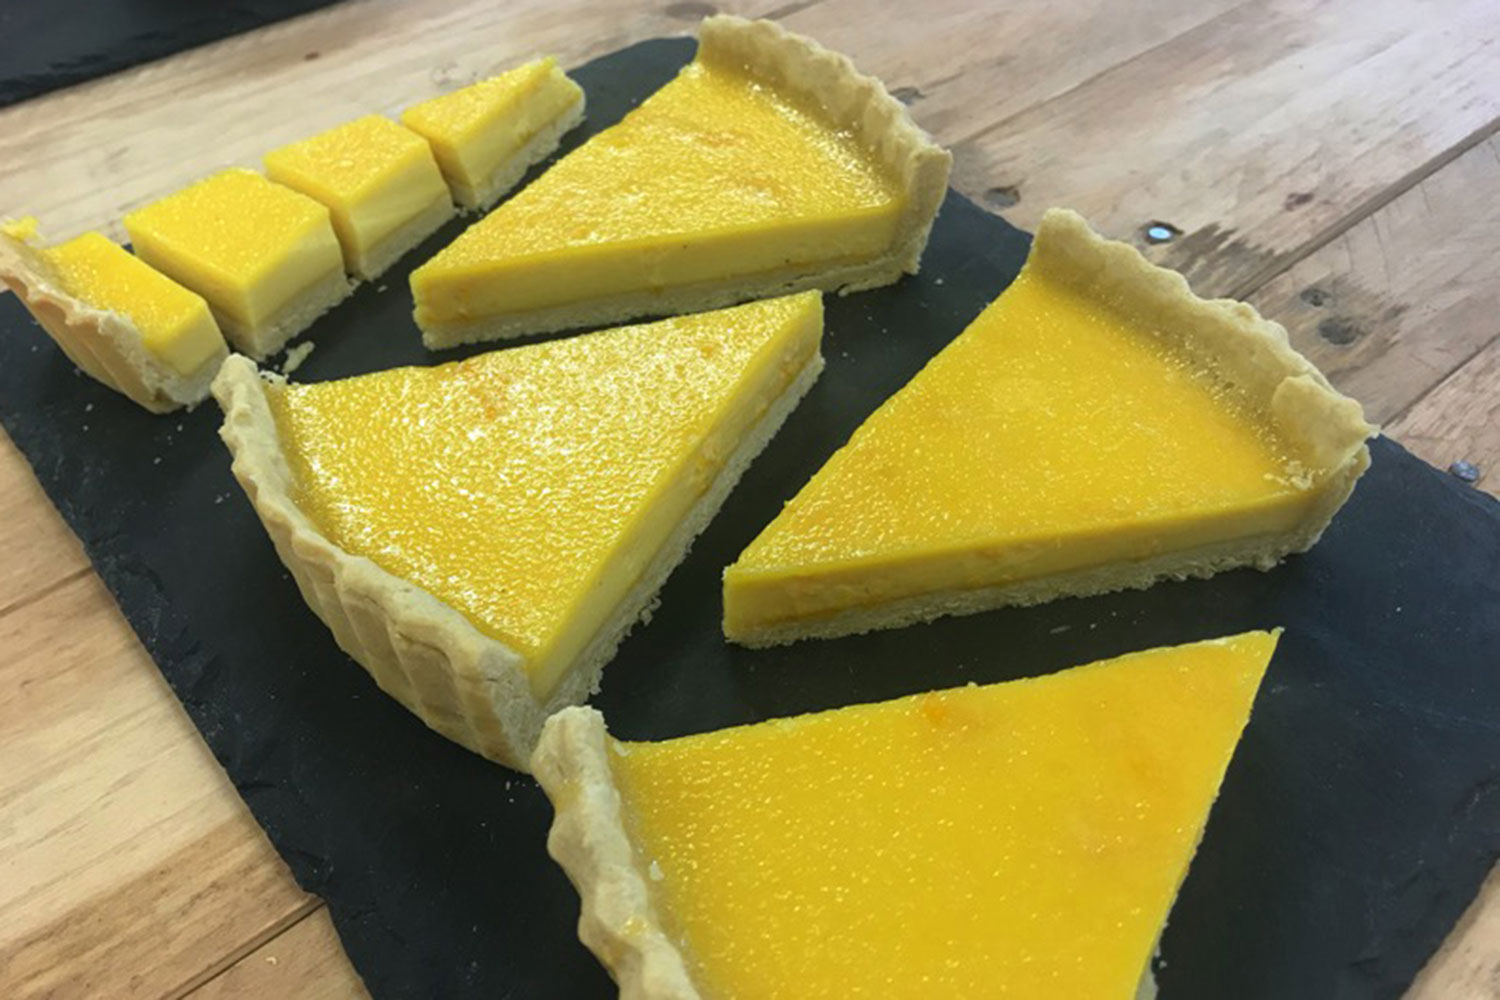 Five slices from a completed lemon custard tart